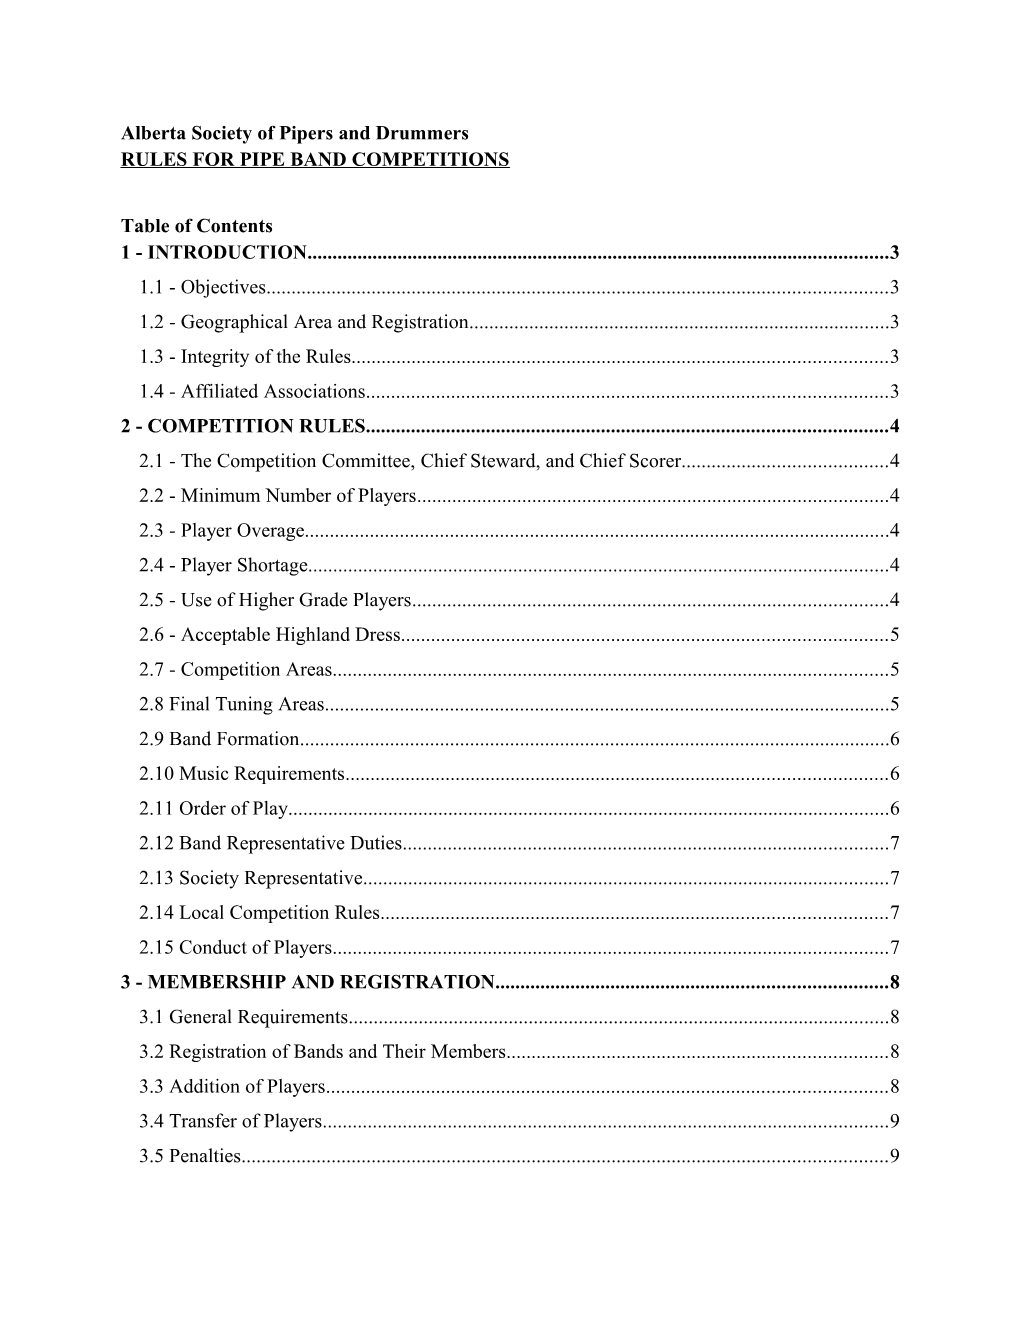 Alberta Society of Pipers and Drummers RULES for PIPE BAND COMPETITIONS